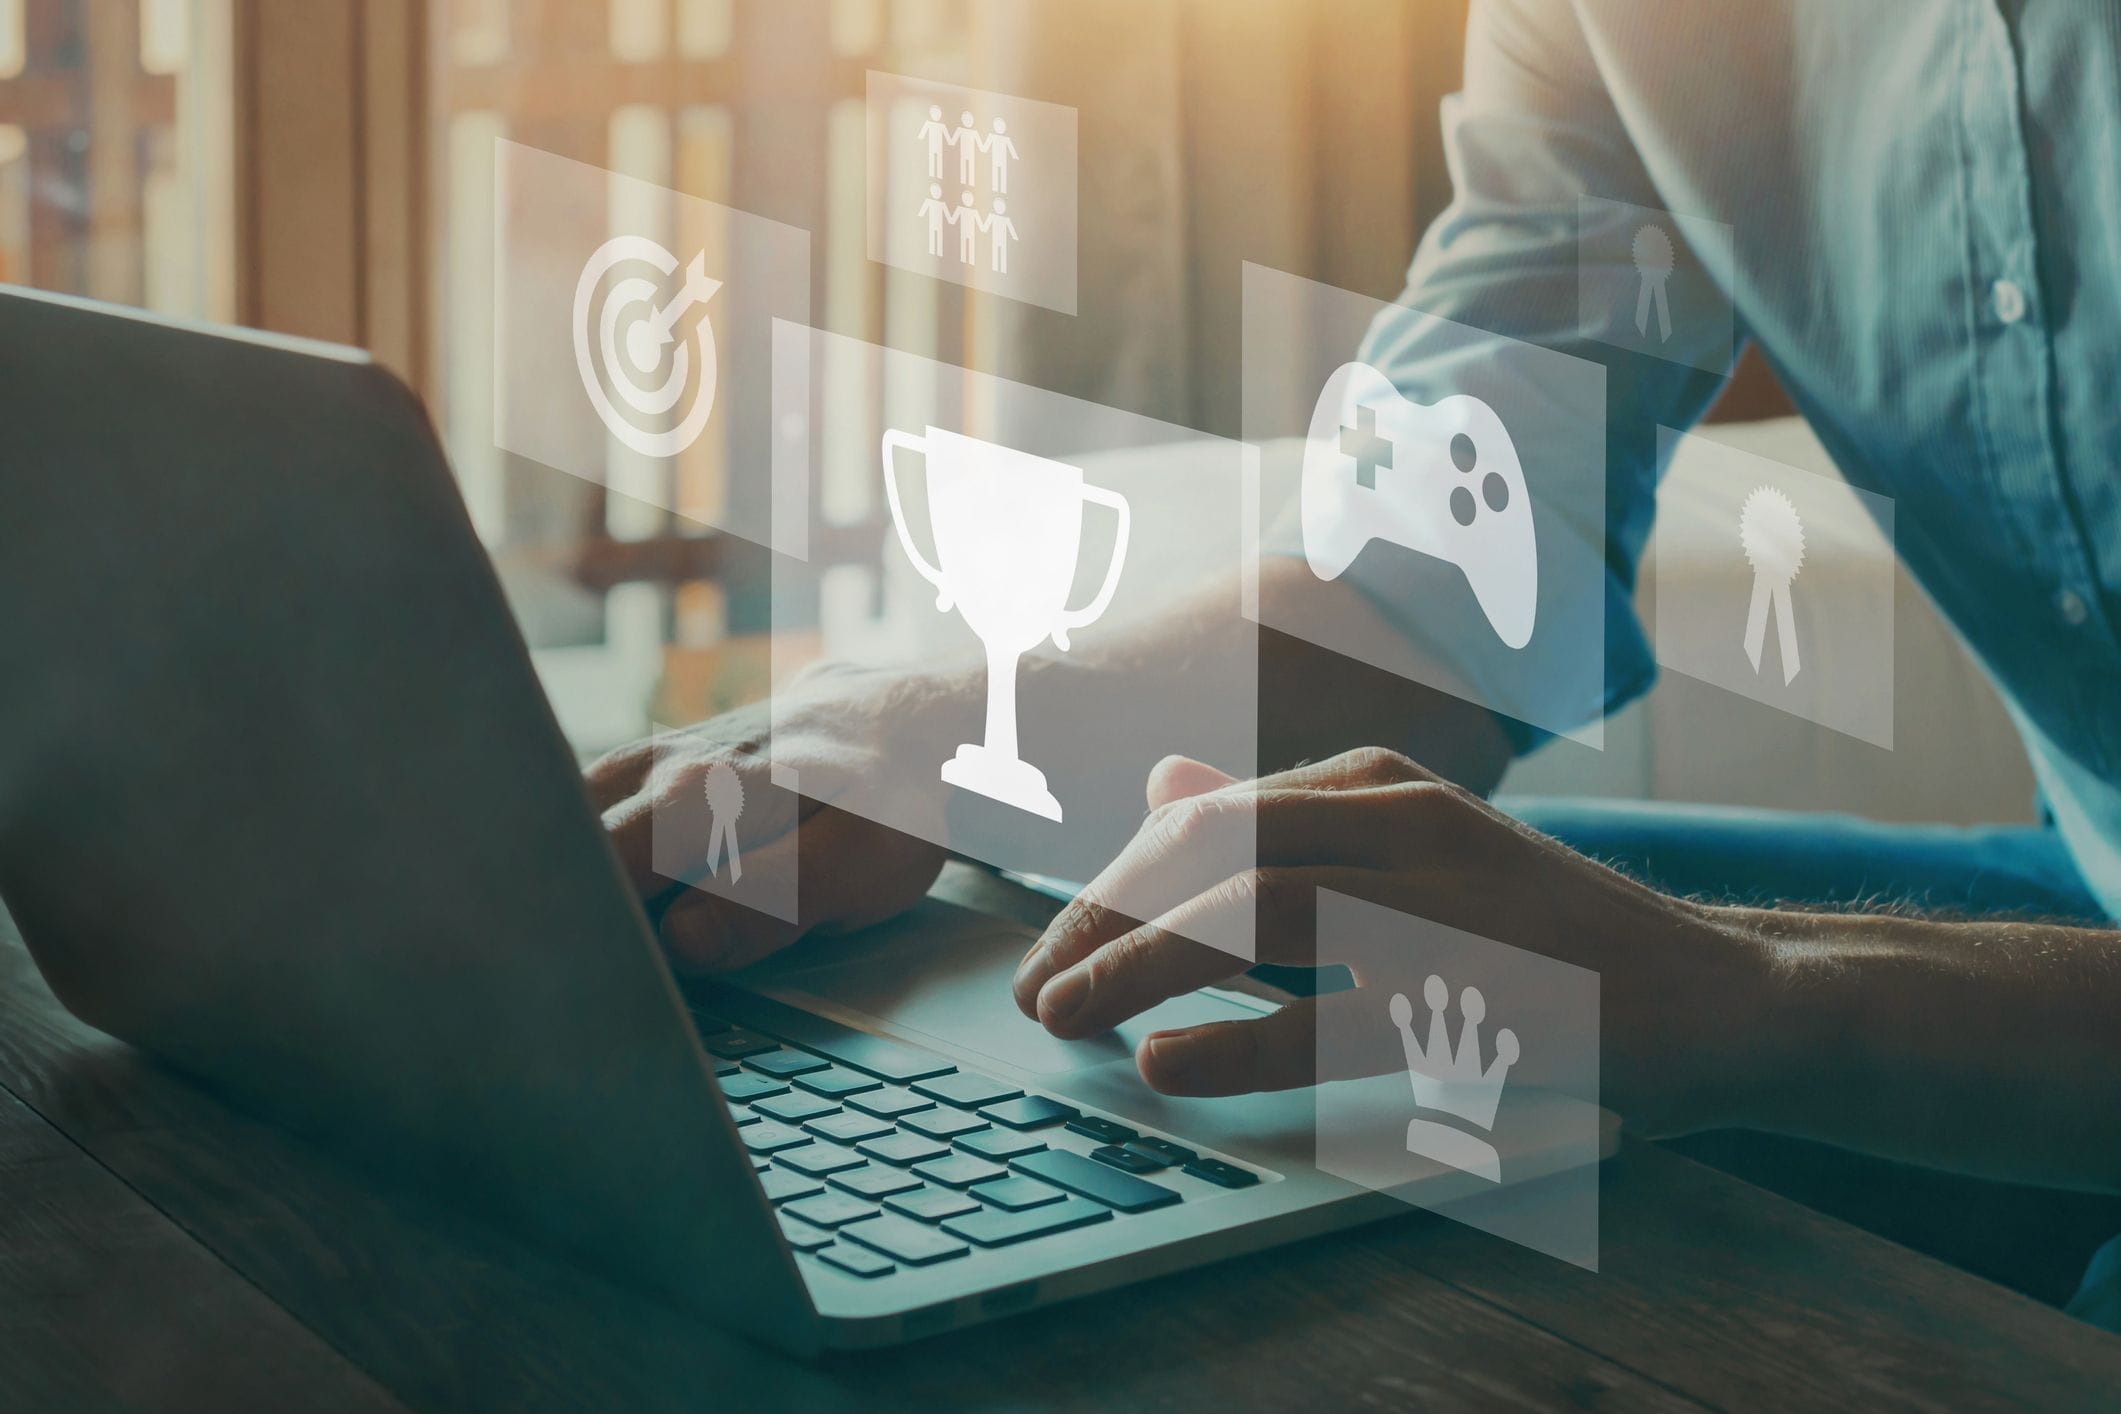 Conceptual image of a person playing educational games on a laptop and earning trophies, rewards, and more.